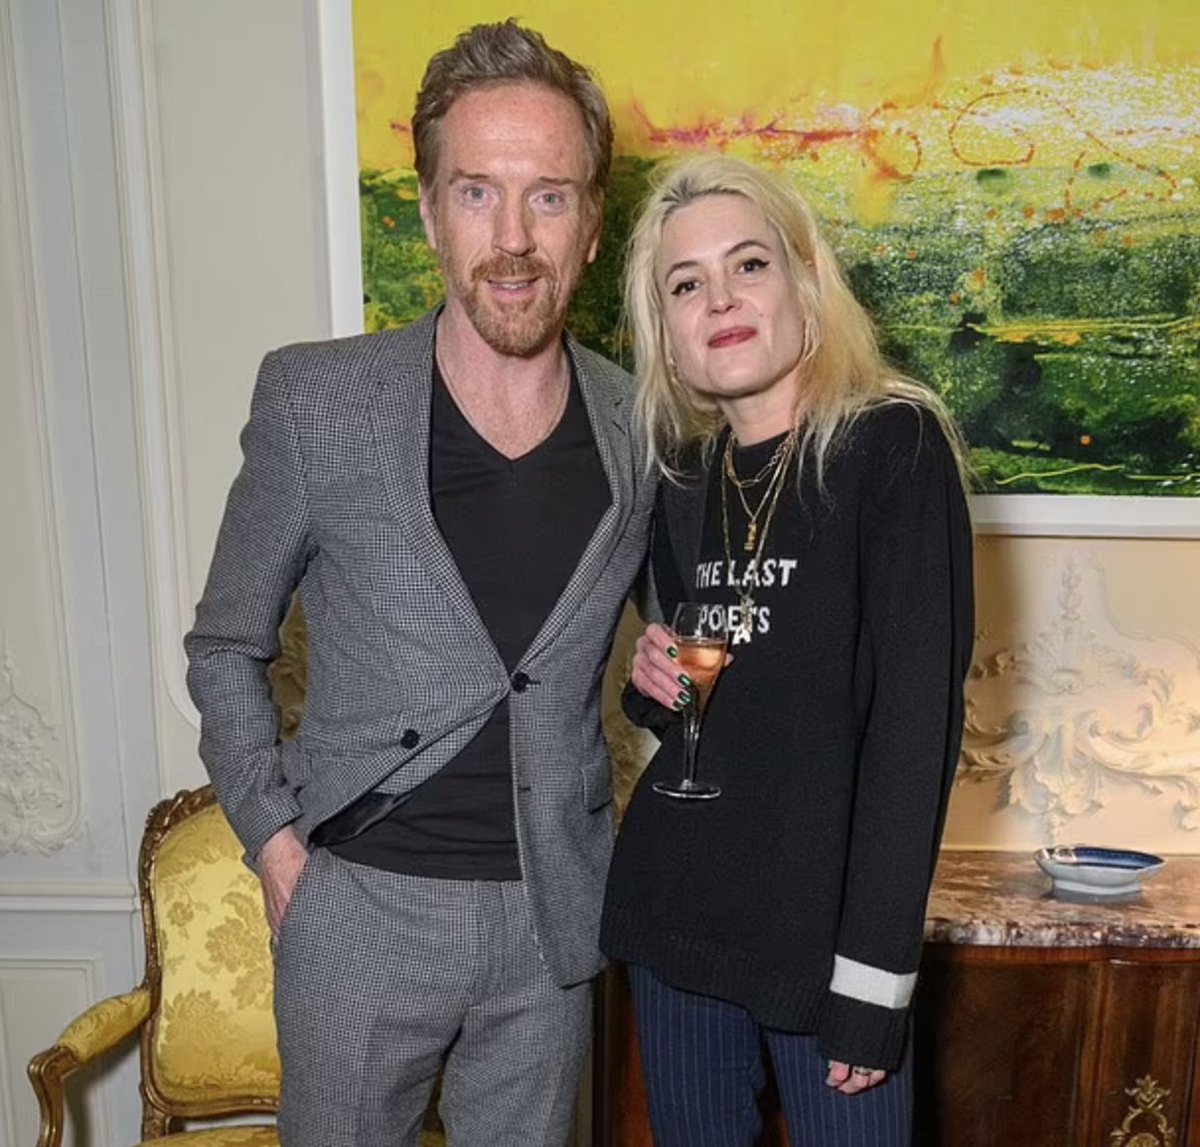 Damian Lewis recited poetry at the US Embassy in London and Alison was there with him 💕 Get the scoop and see photos: damian-lewis.com/?p=53579 #DamianLewis #AlisonMosshart #ThePoetryHour #JosephineHartPoetryFoundation #JosephineHart ps. I LOVE Alison's sweater!